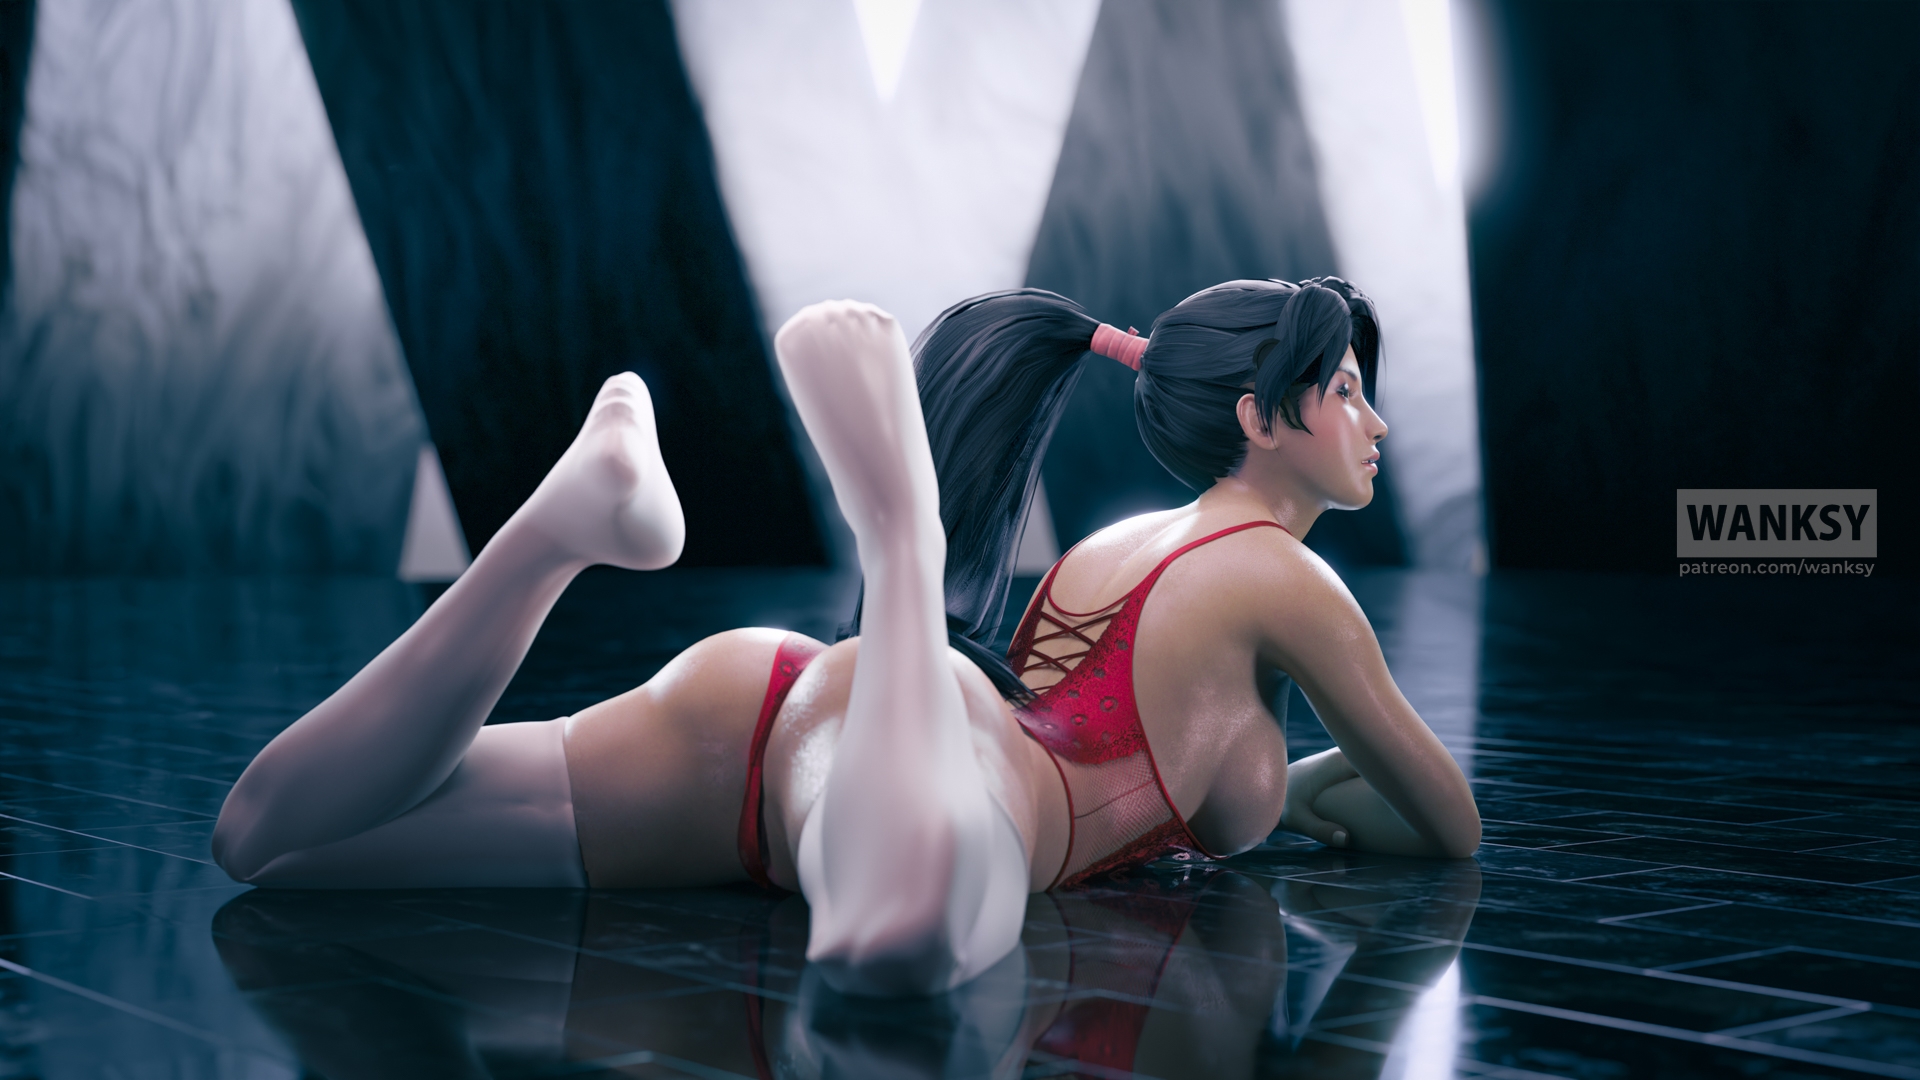 [Poster] Momiji Momiji Dead Or Alive Female Outfit Pose Partially_clothed Big Tits Big Ass Long Socks Lingerie